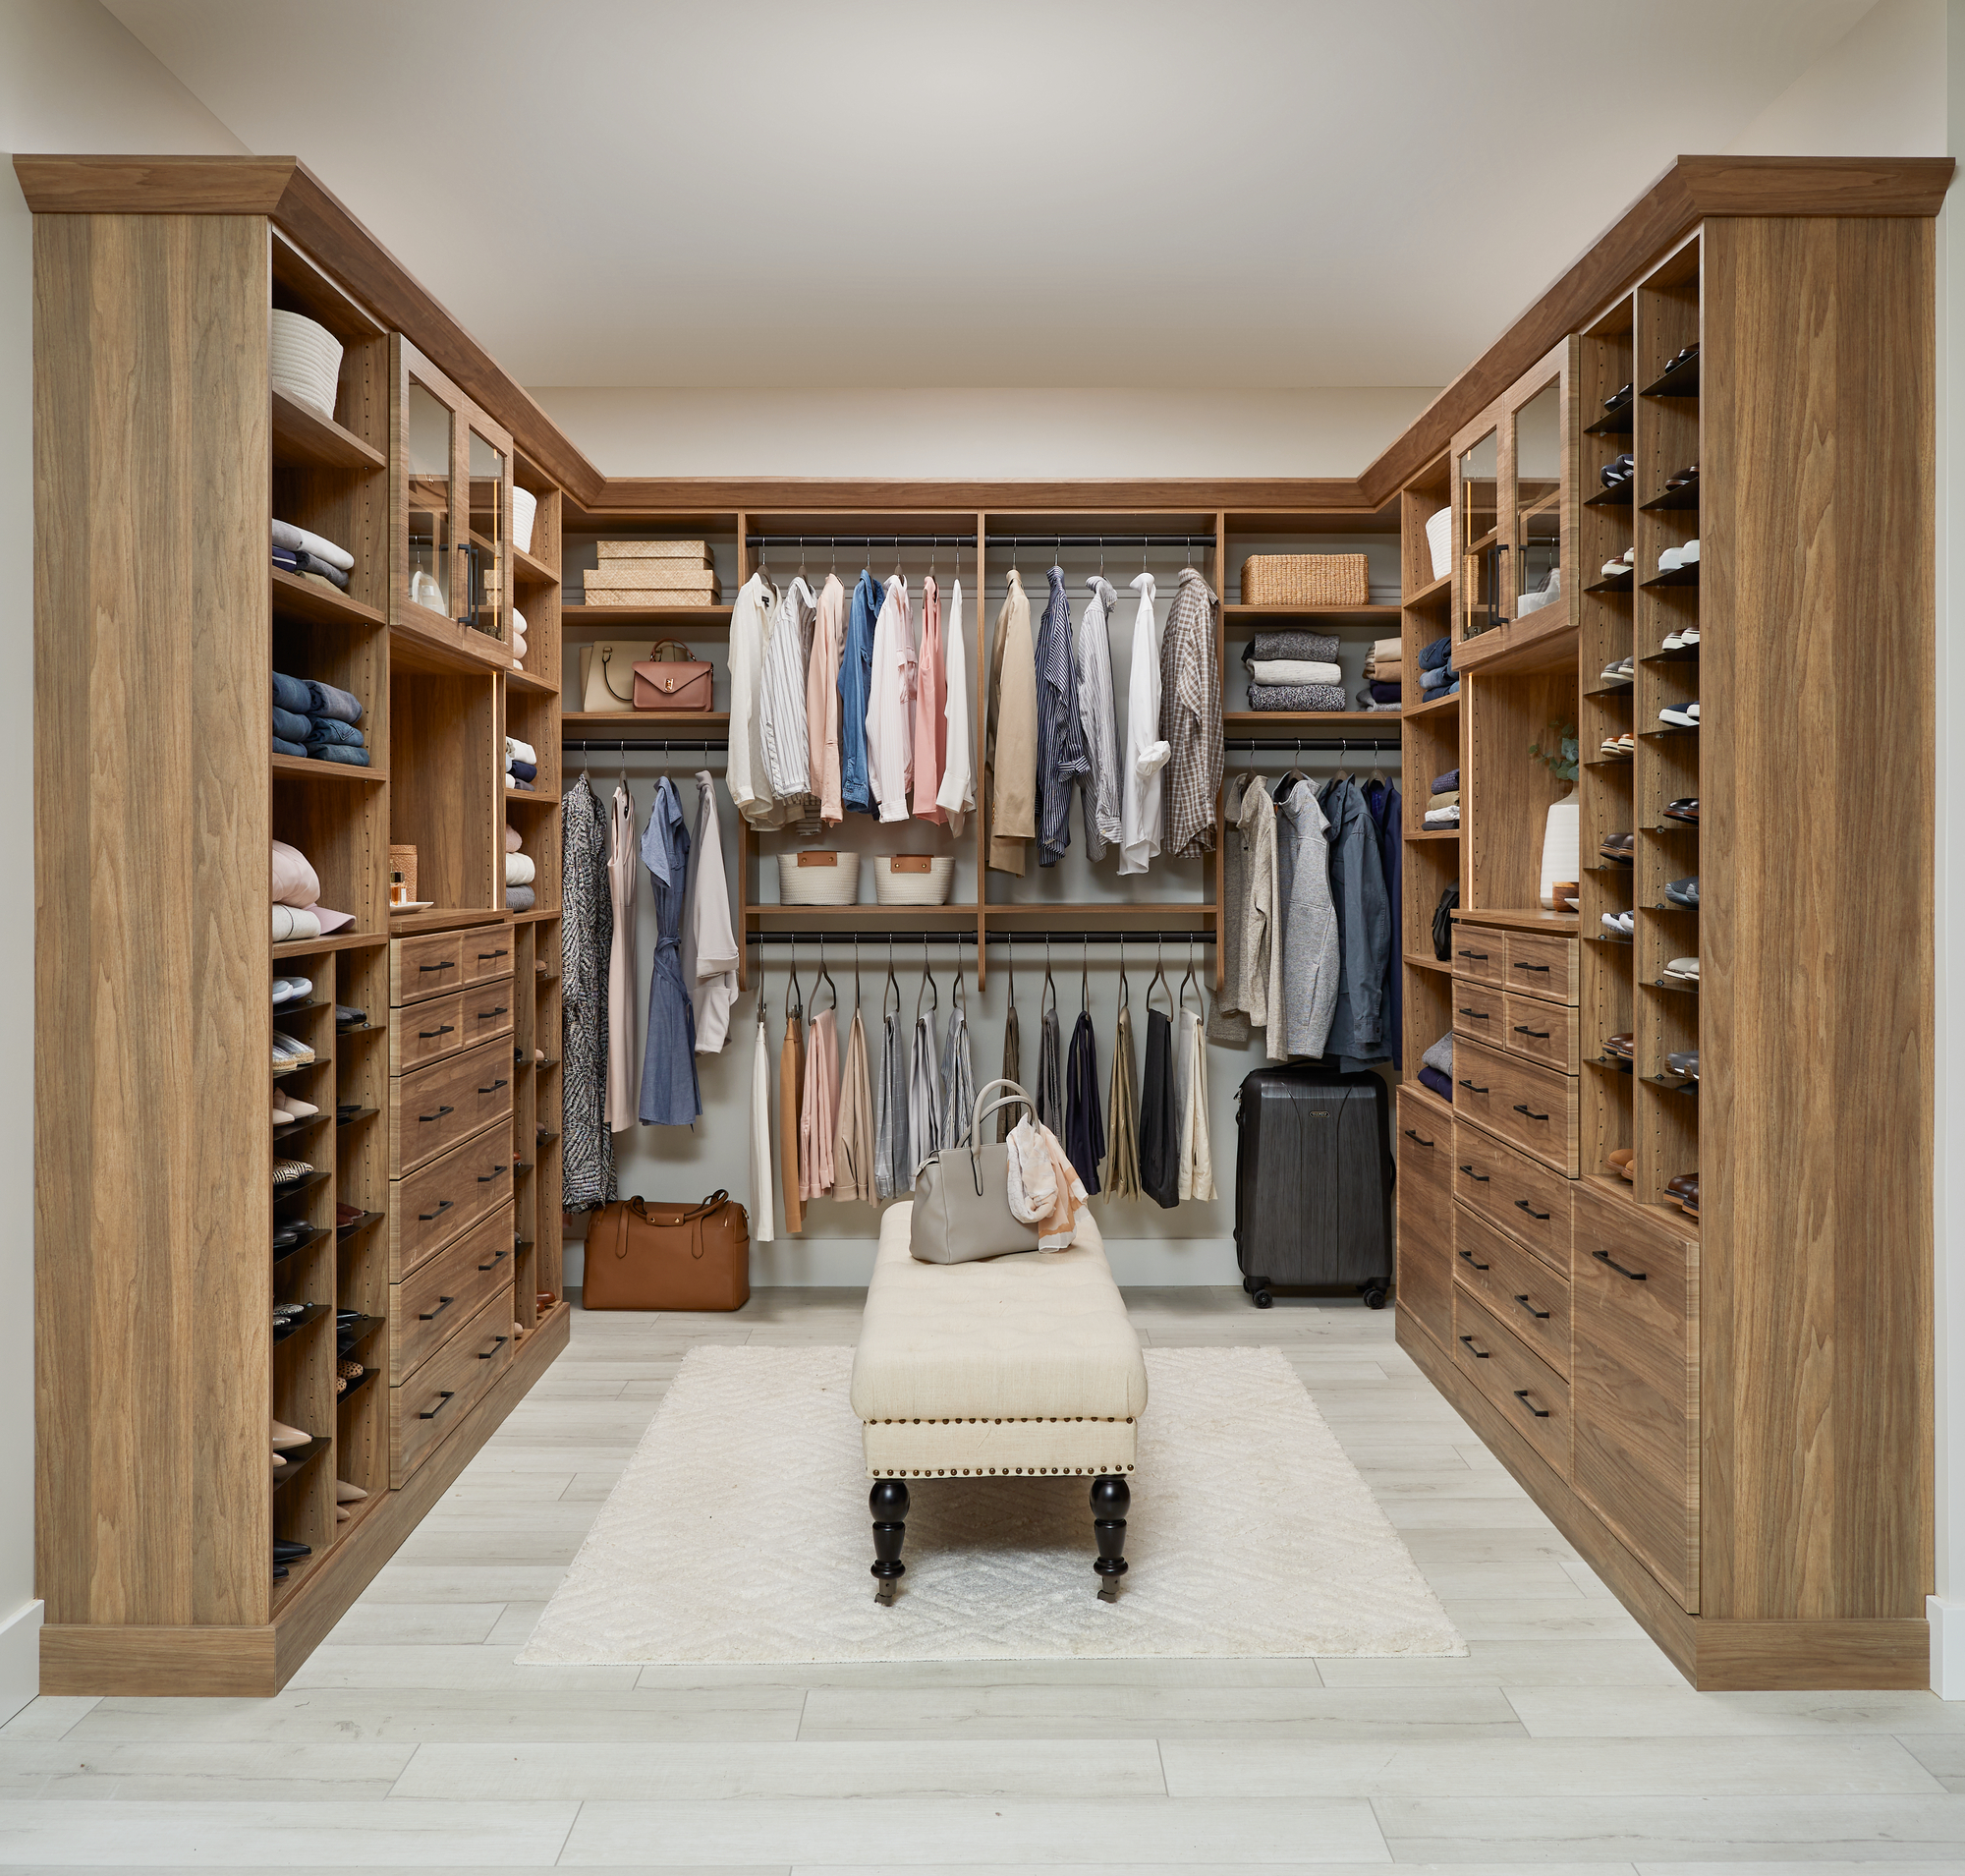 Men and Women's custom walk in closet with armoire from Inspired Closets